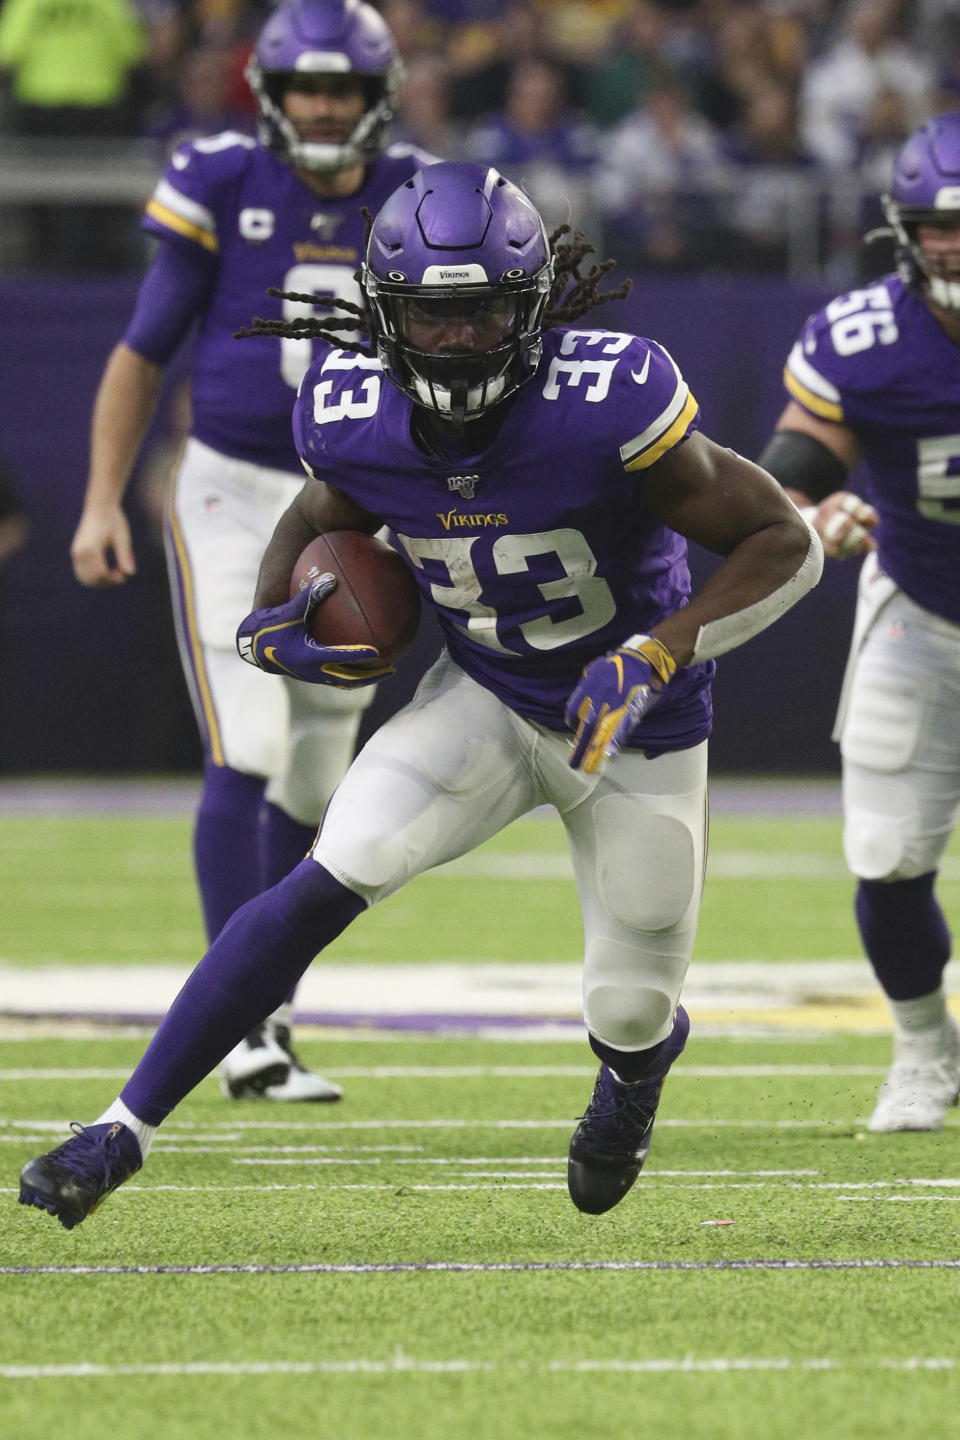 Minnesota Vikings running back Dalvin Cook (33) carries the ball in an NFL game against the Detroit Lions, Sunday, Dec. 8, 2019 in Minneapolis. The Vikings defeated the Lions 20-7. (Margaret Bowles via AP)